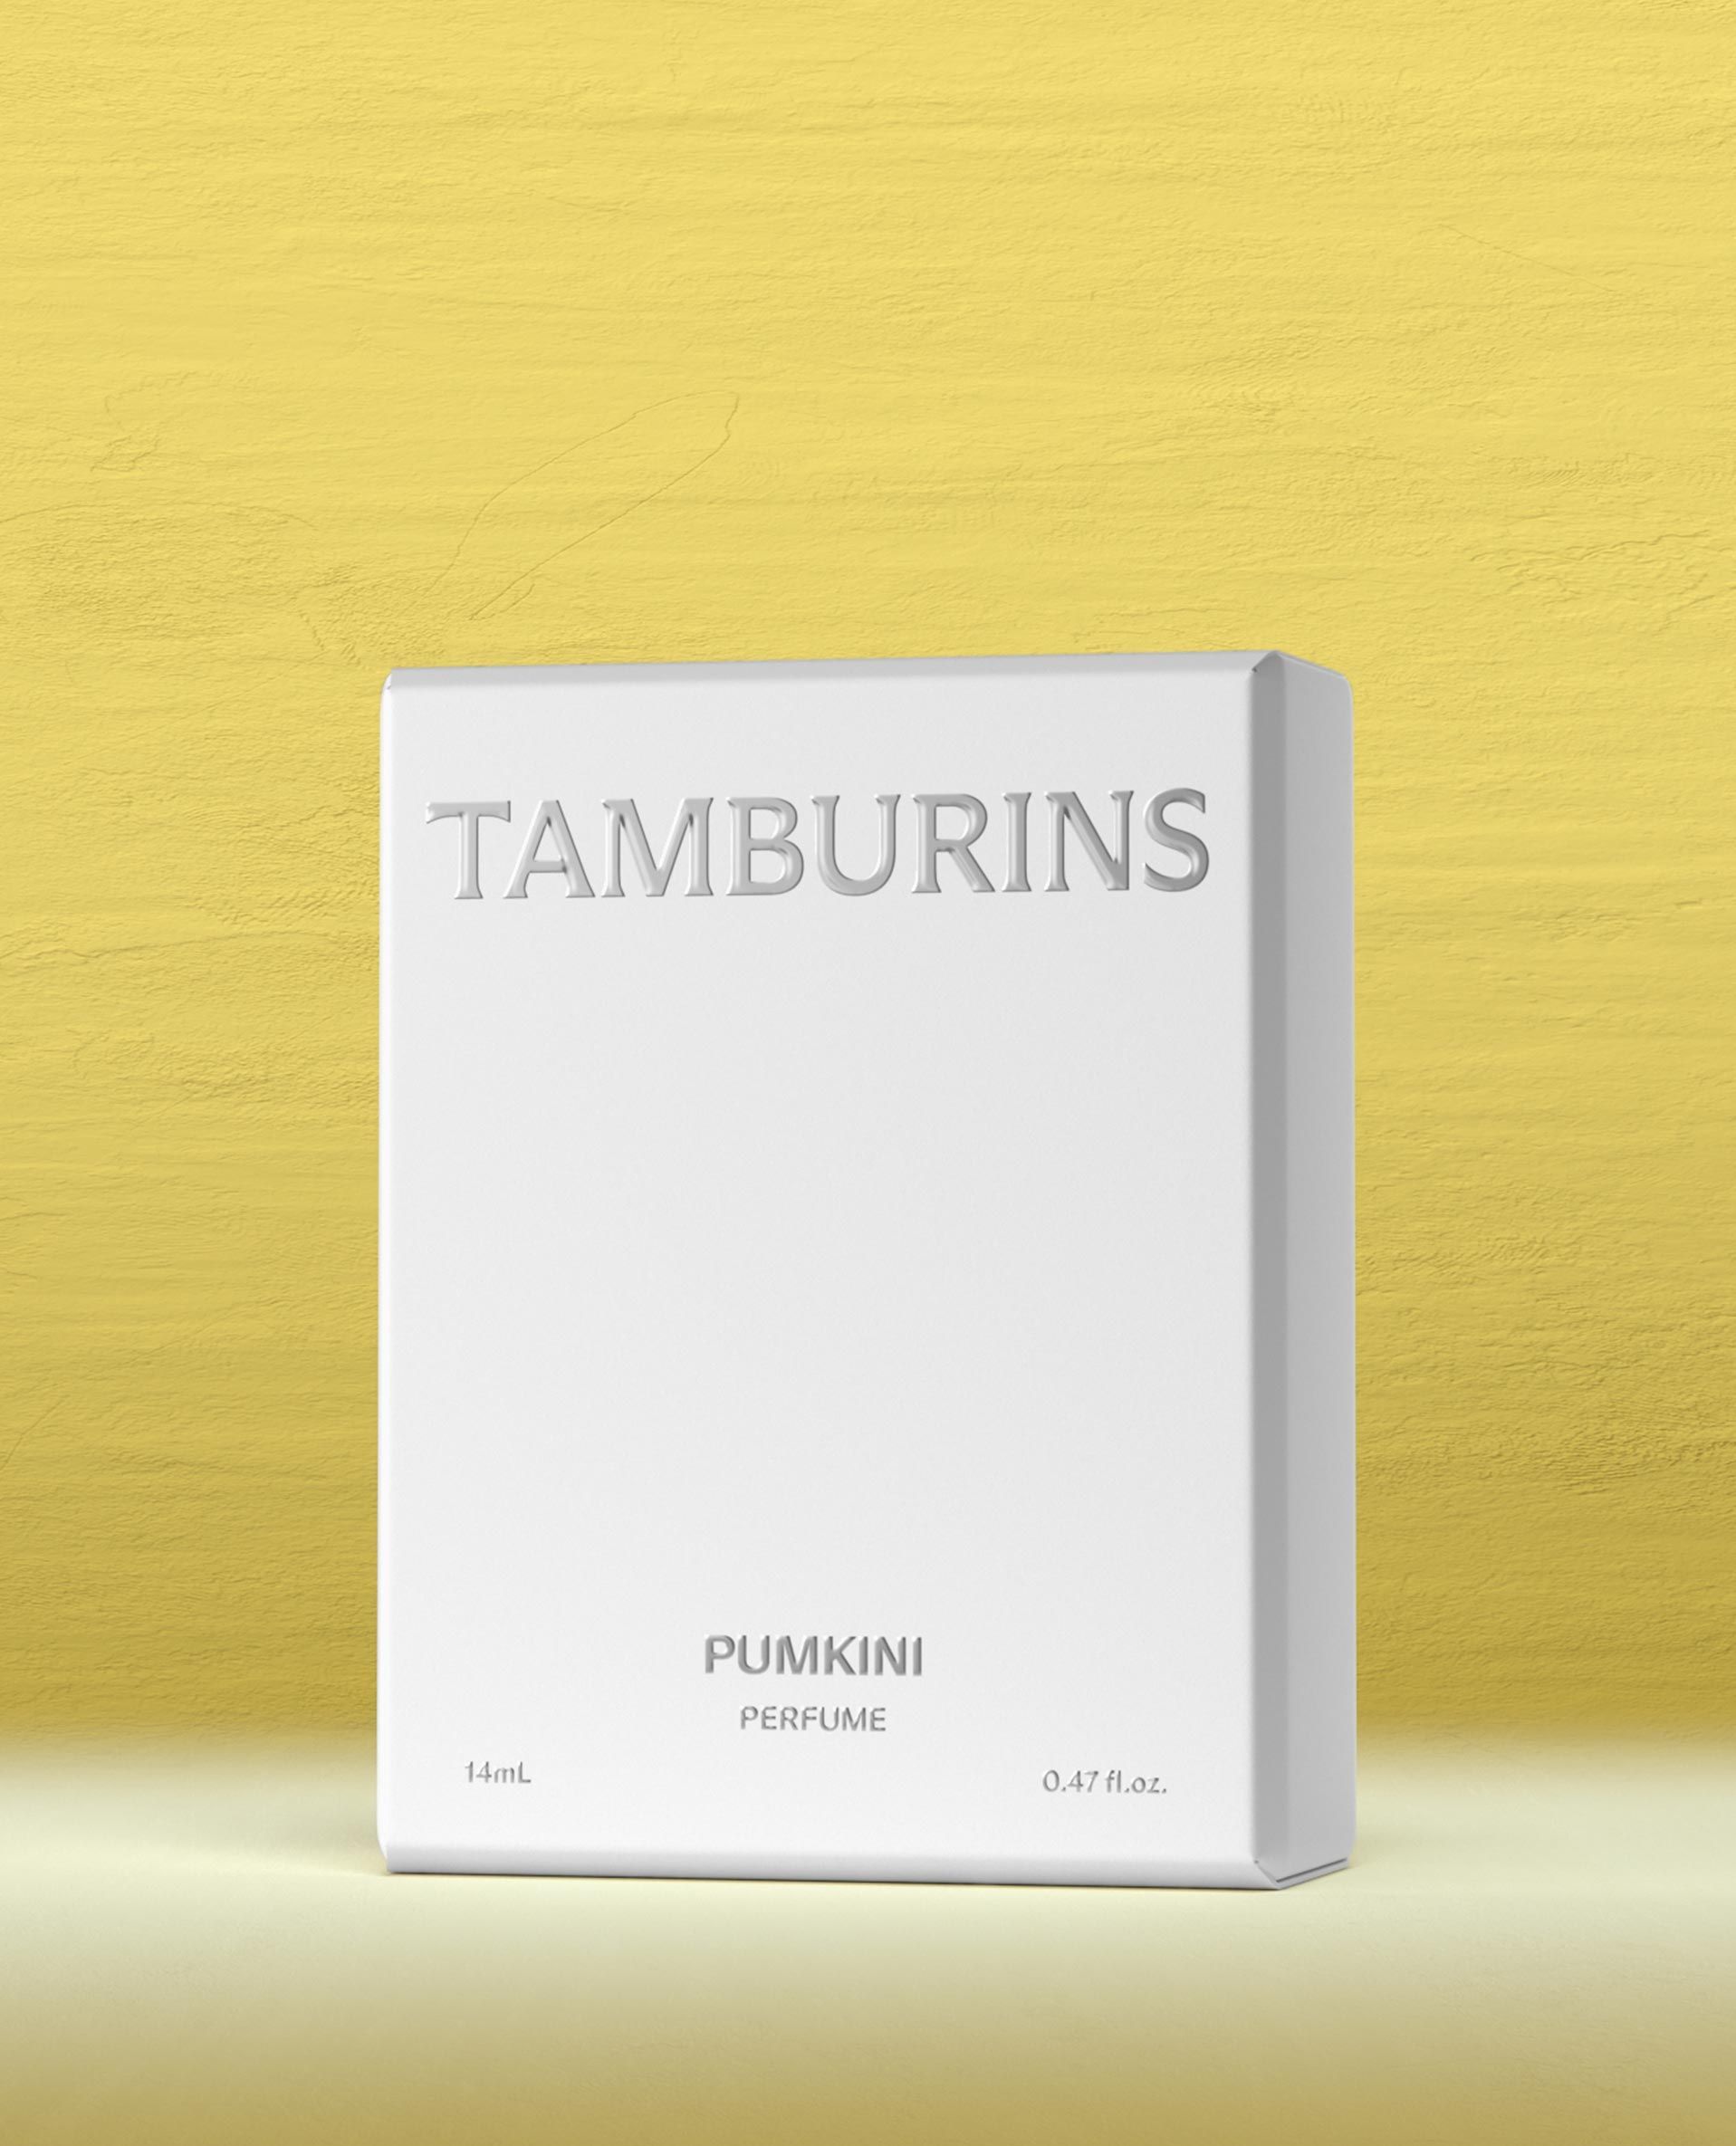 TAMBURINS The Egg Perfume comes in 14ml with 3 fragrances to choose from, also available in 50ml.